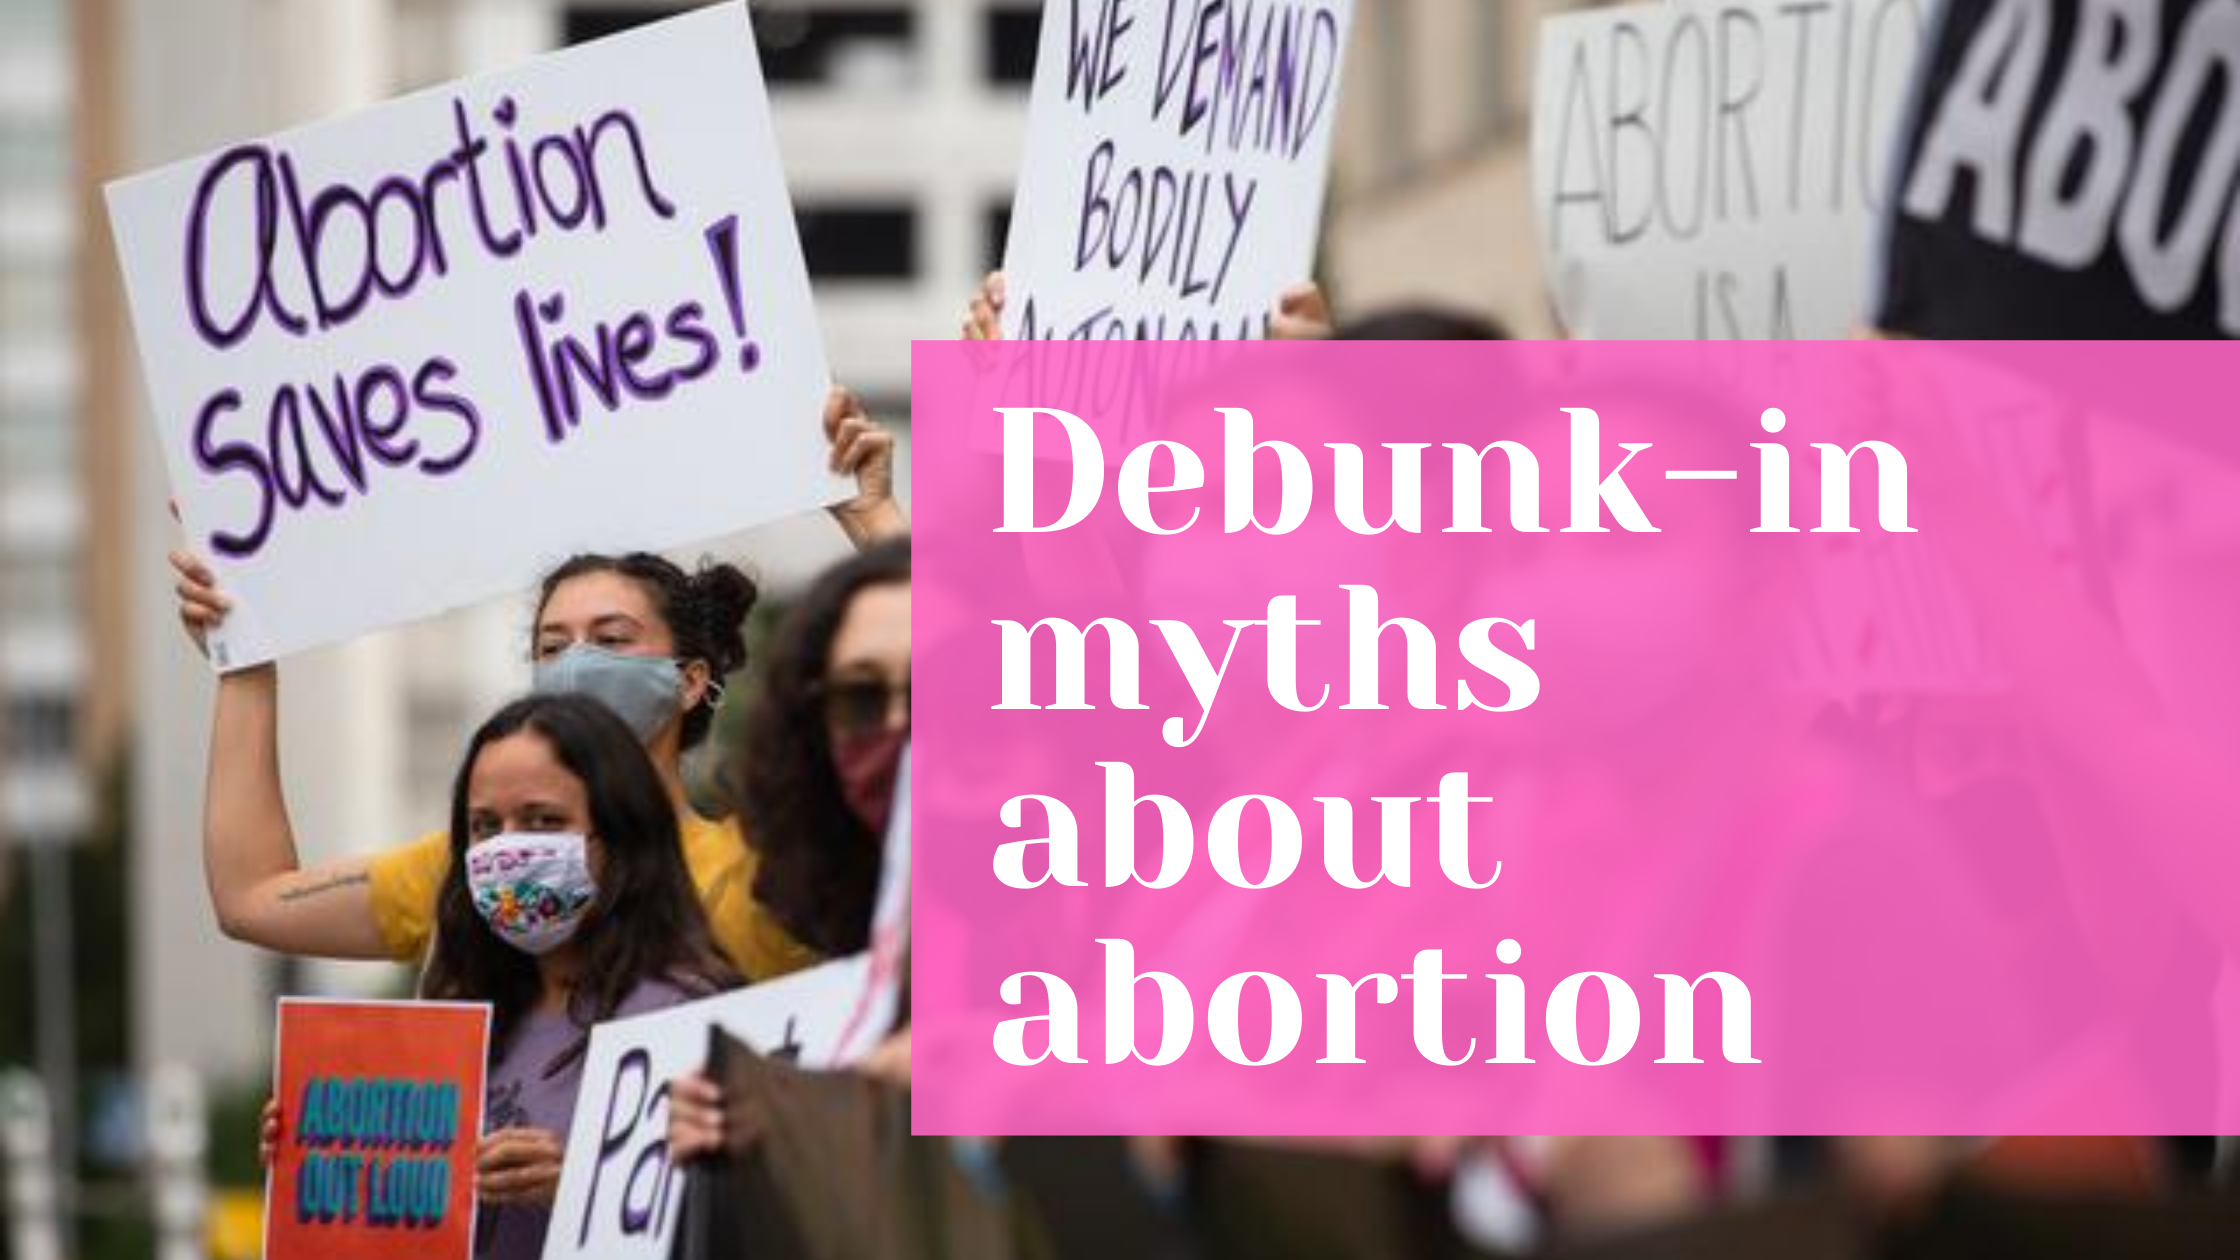 Debunk-in myths about abortion that you have been told